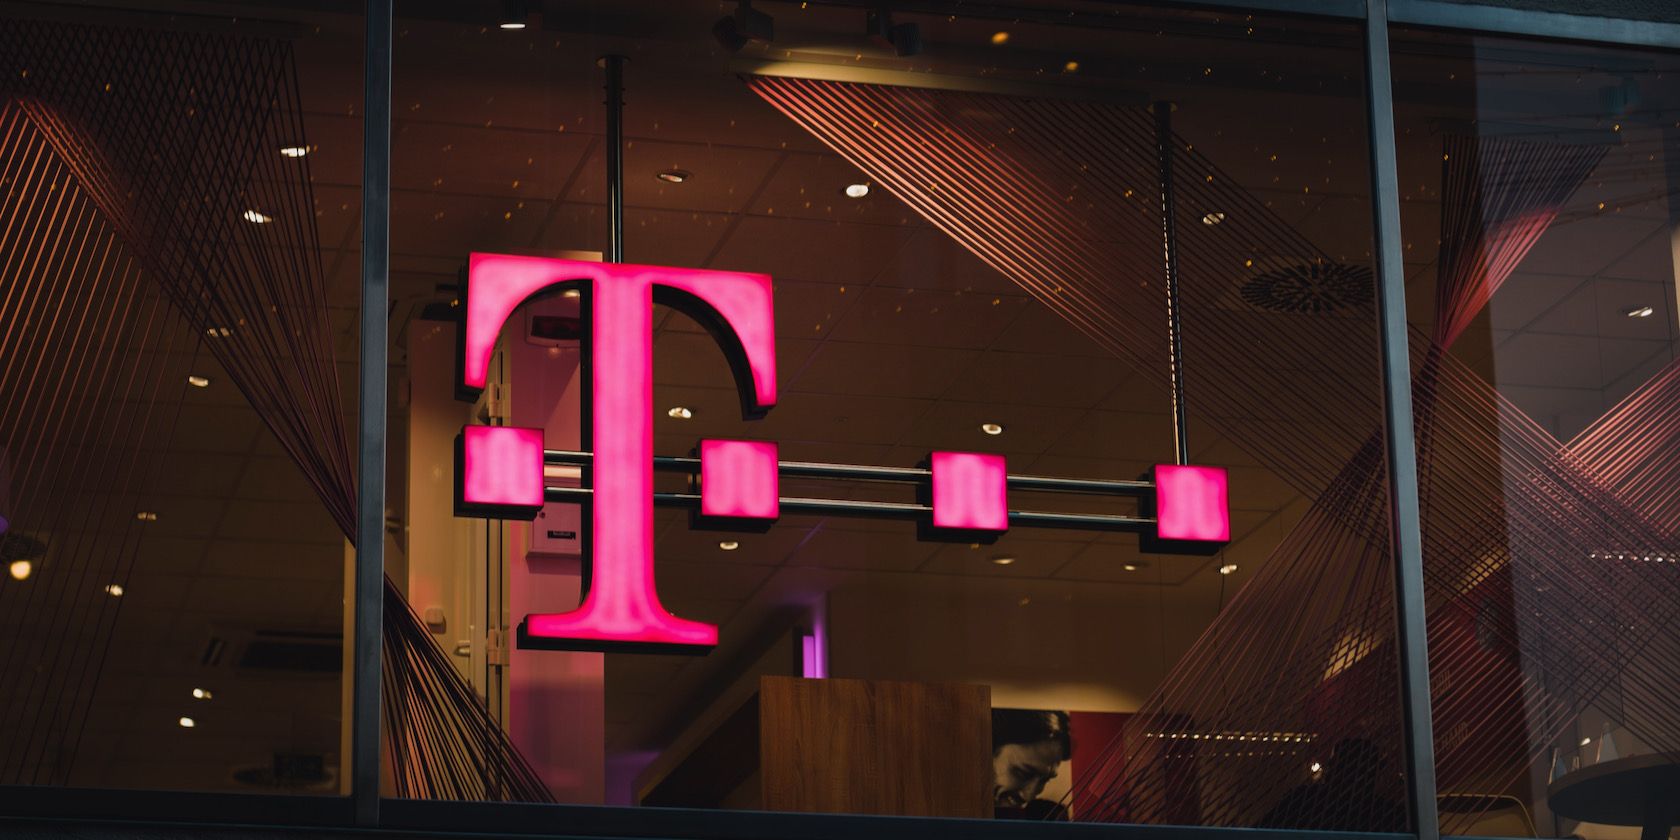 TMobile Customers Can Now Get MLB.TV for Free